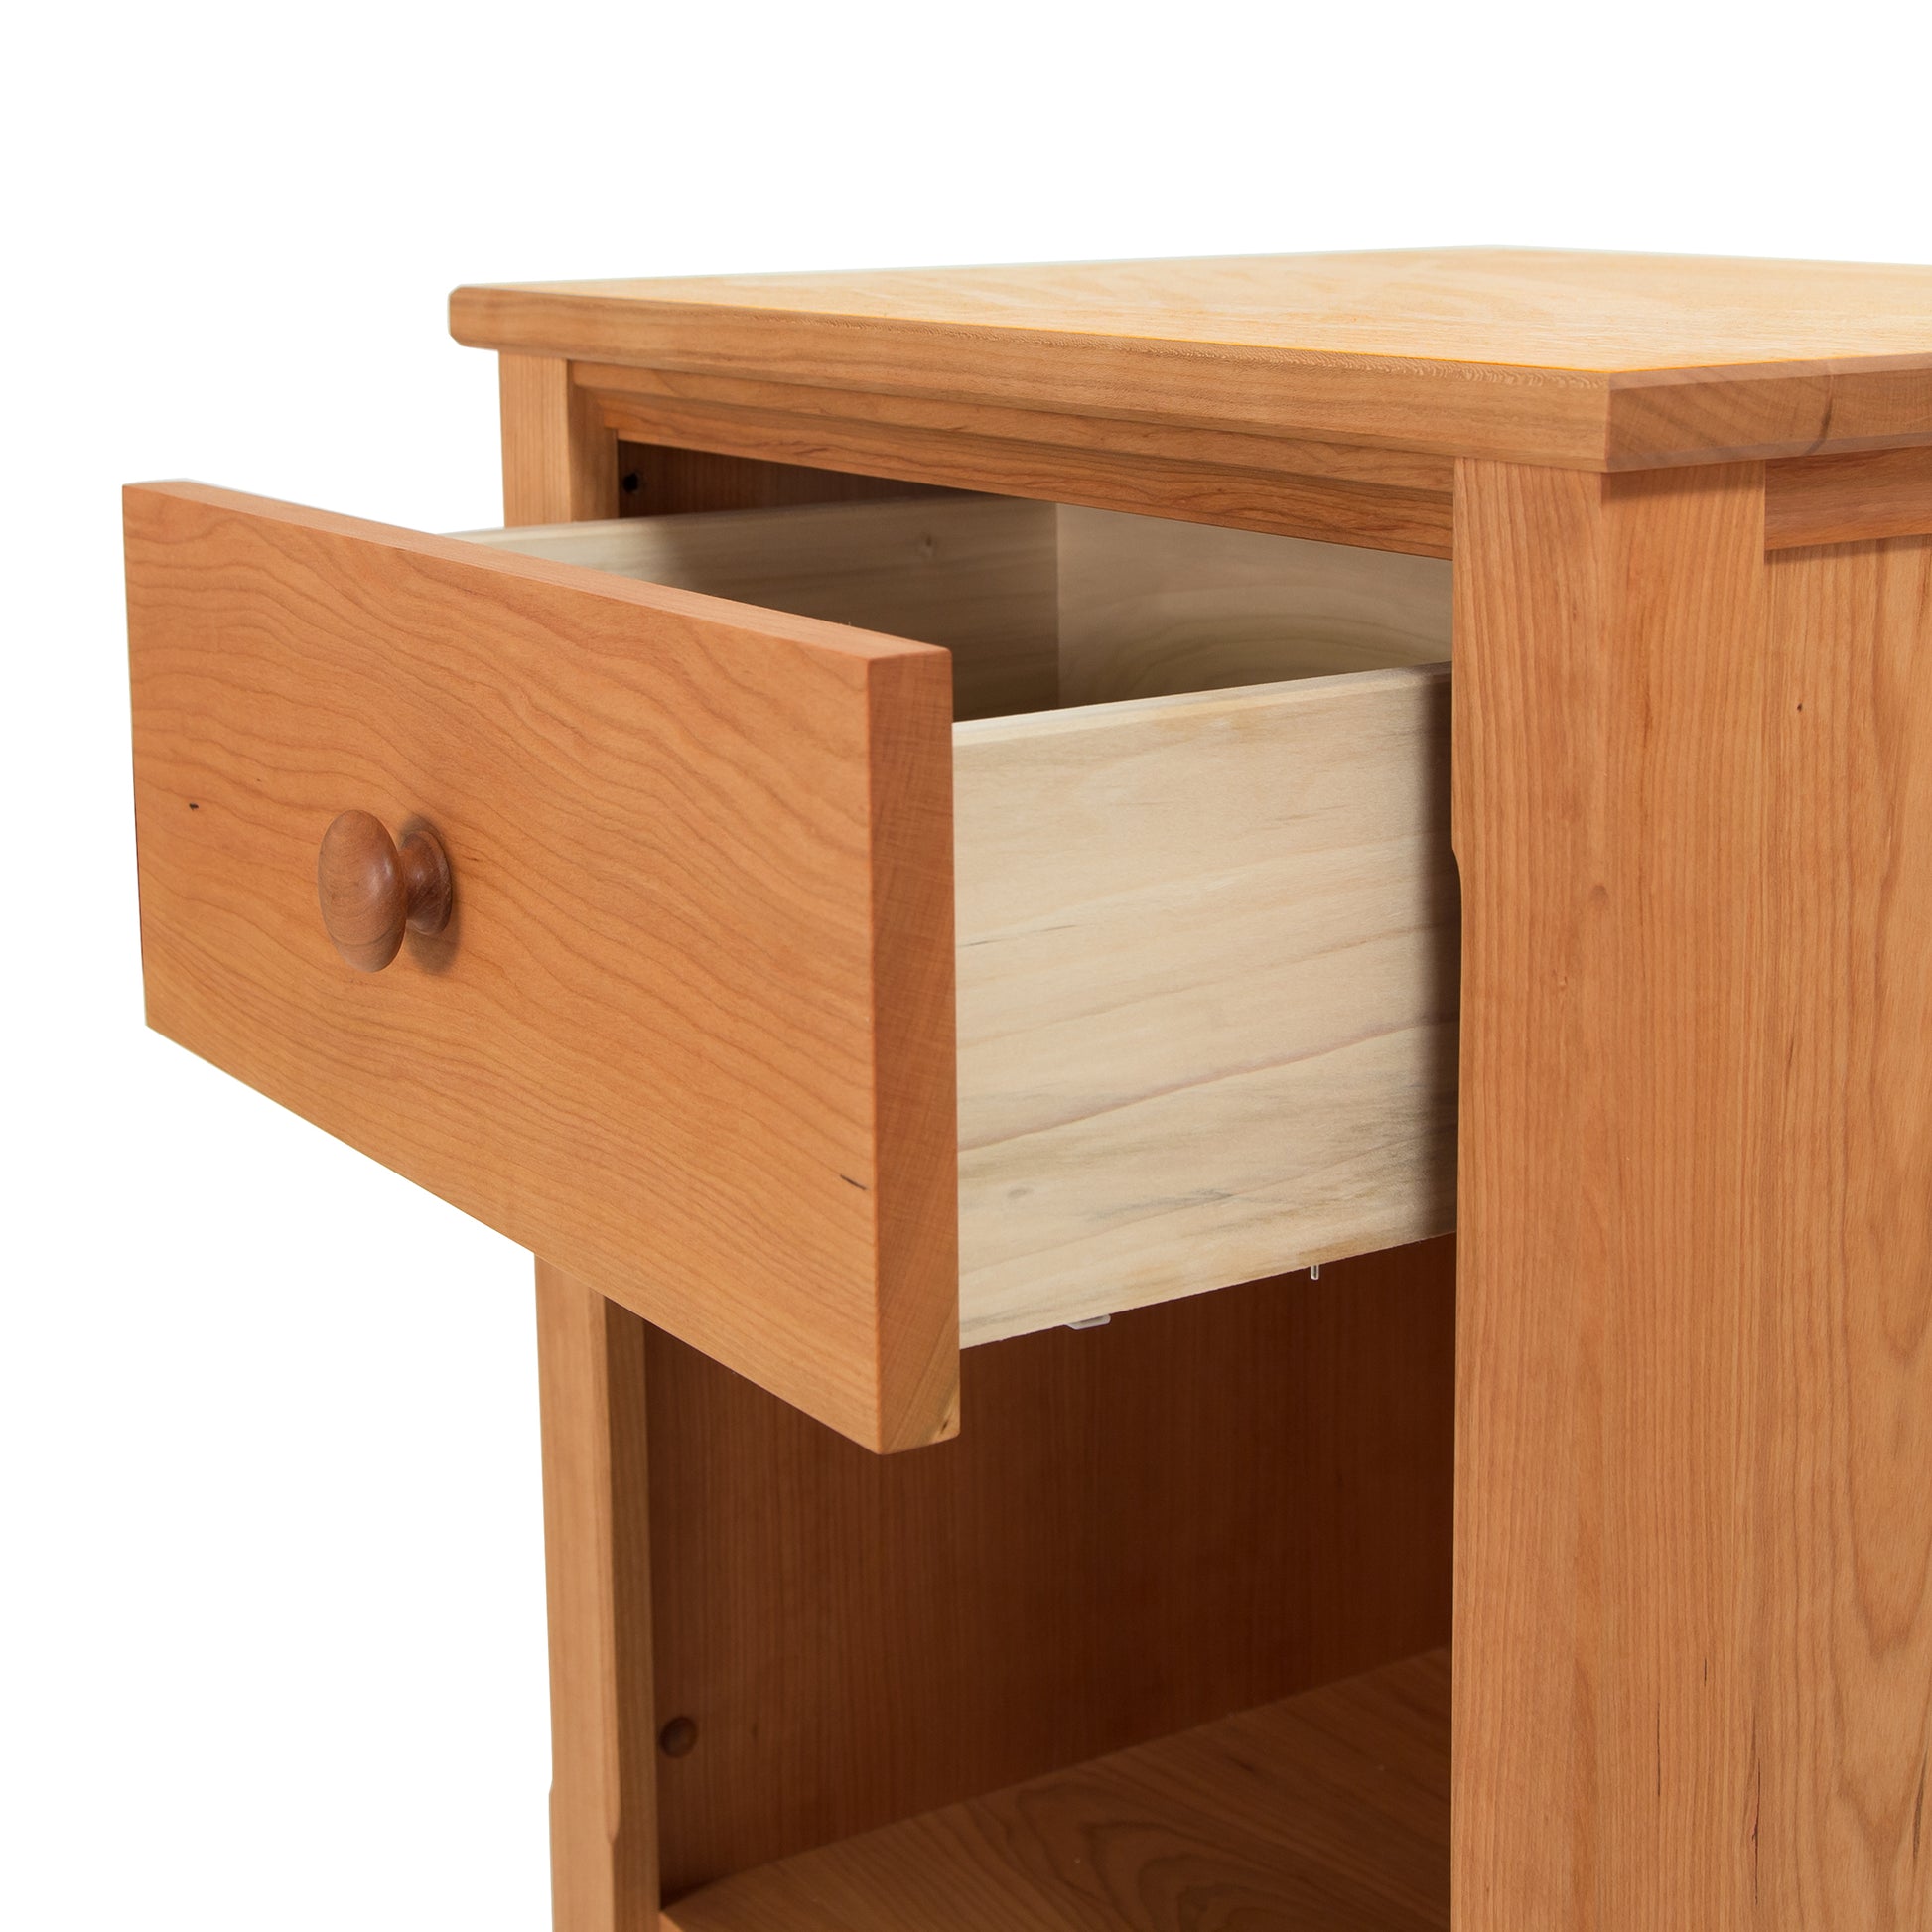 A Maple Corner Woodworks Vermont Shaker 1-Drawer Enclosed Shelf Nightstand made of natural hardwoods.